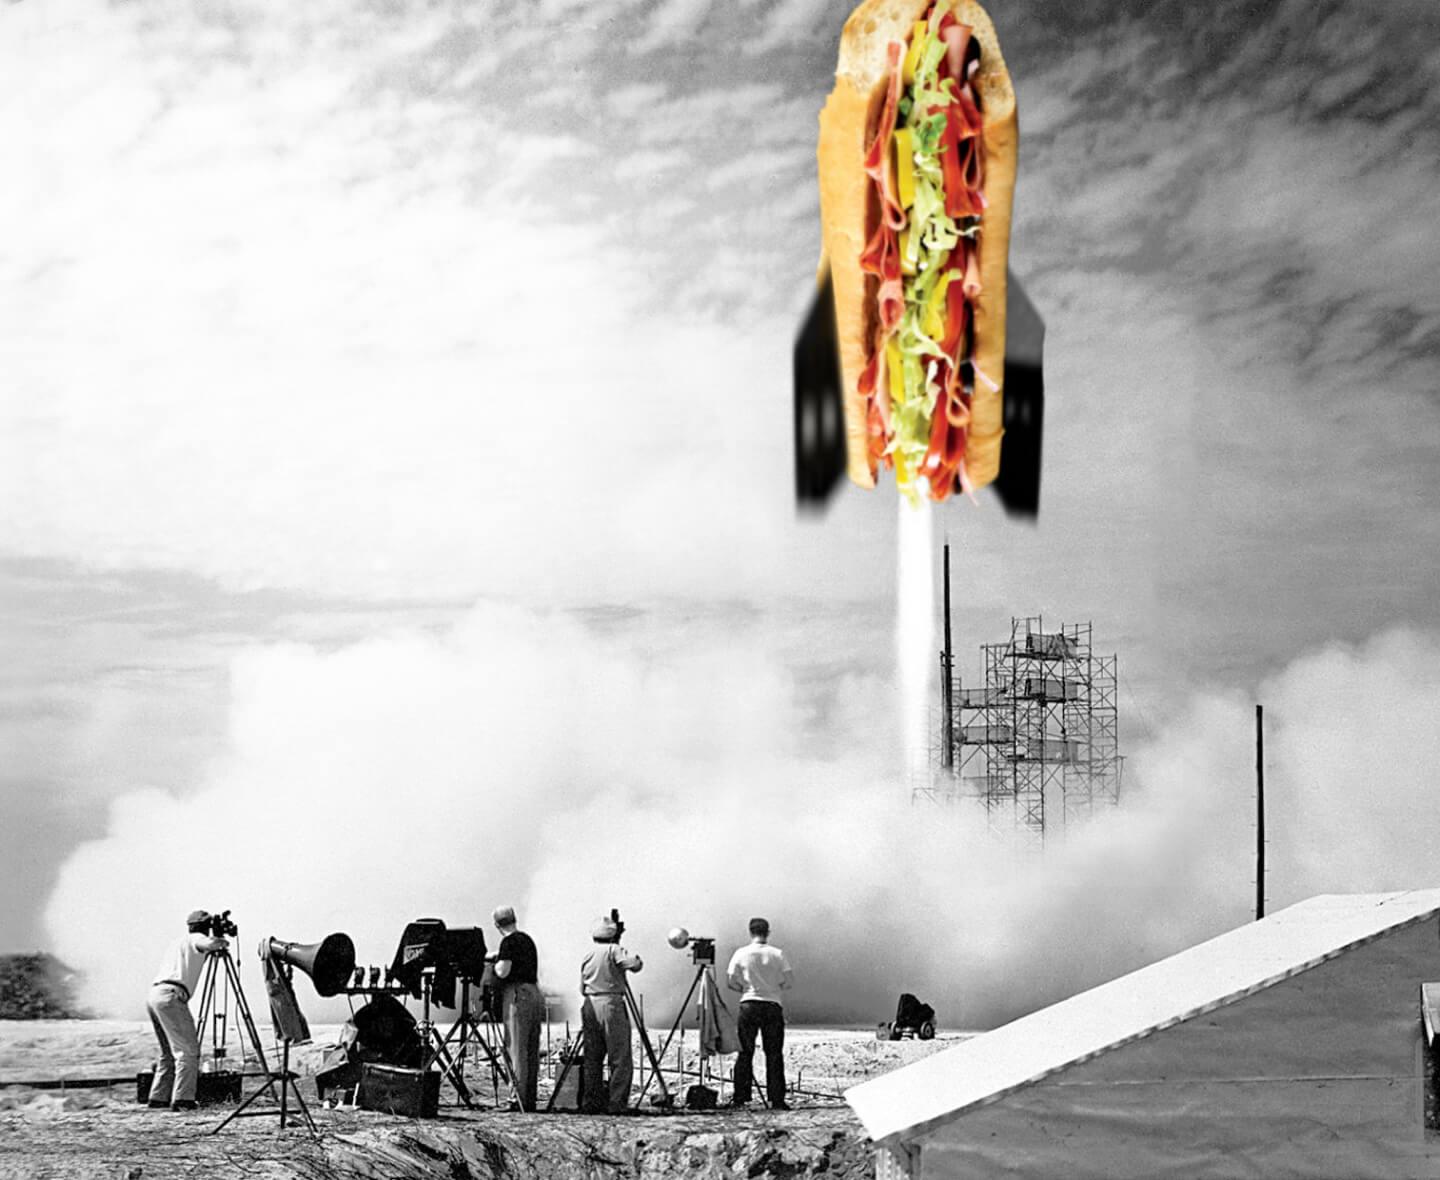 A group of men filming the launch of a Quiznos sub rocket launching into space